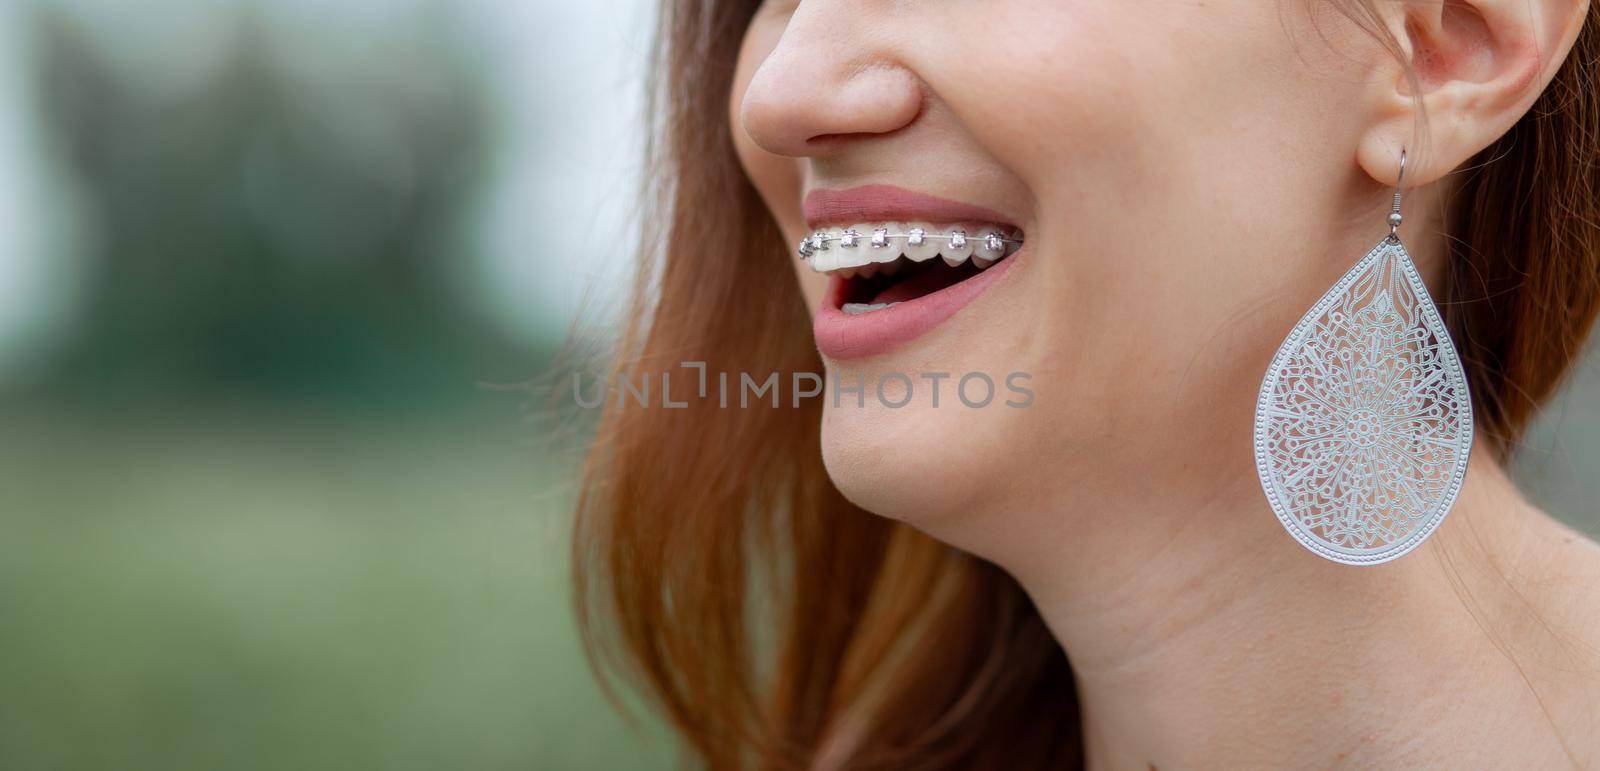 The smile of a young and beautiful girl with braces on her white teeth by AnatoliiFoto